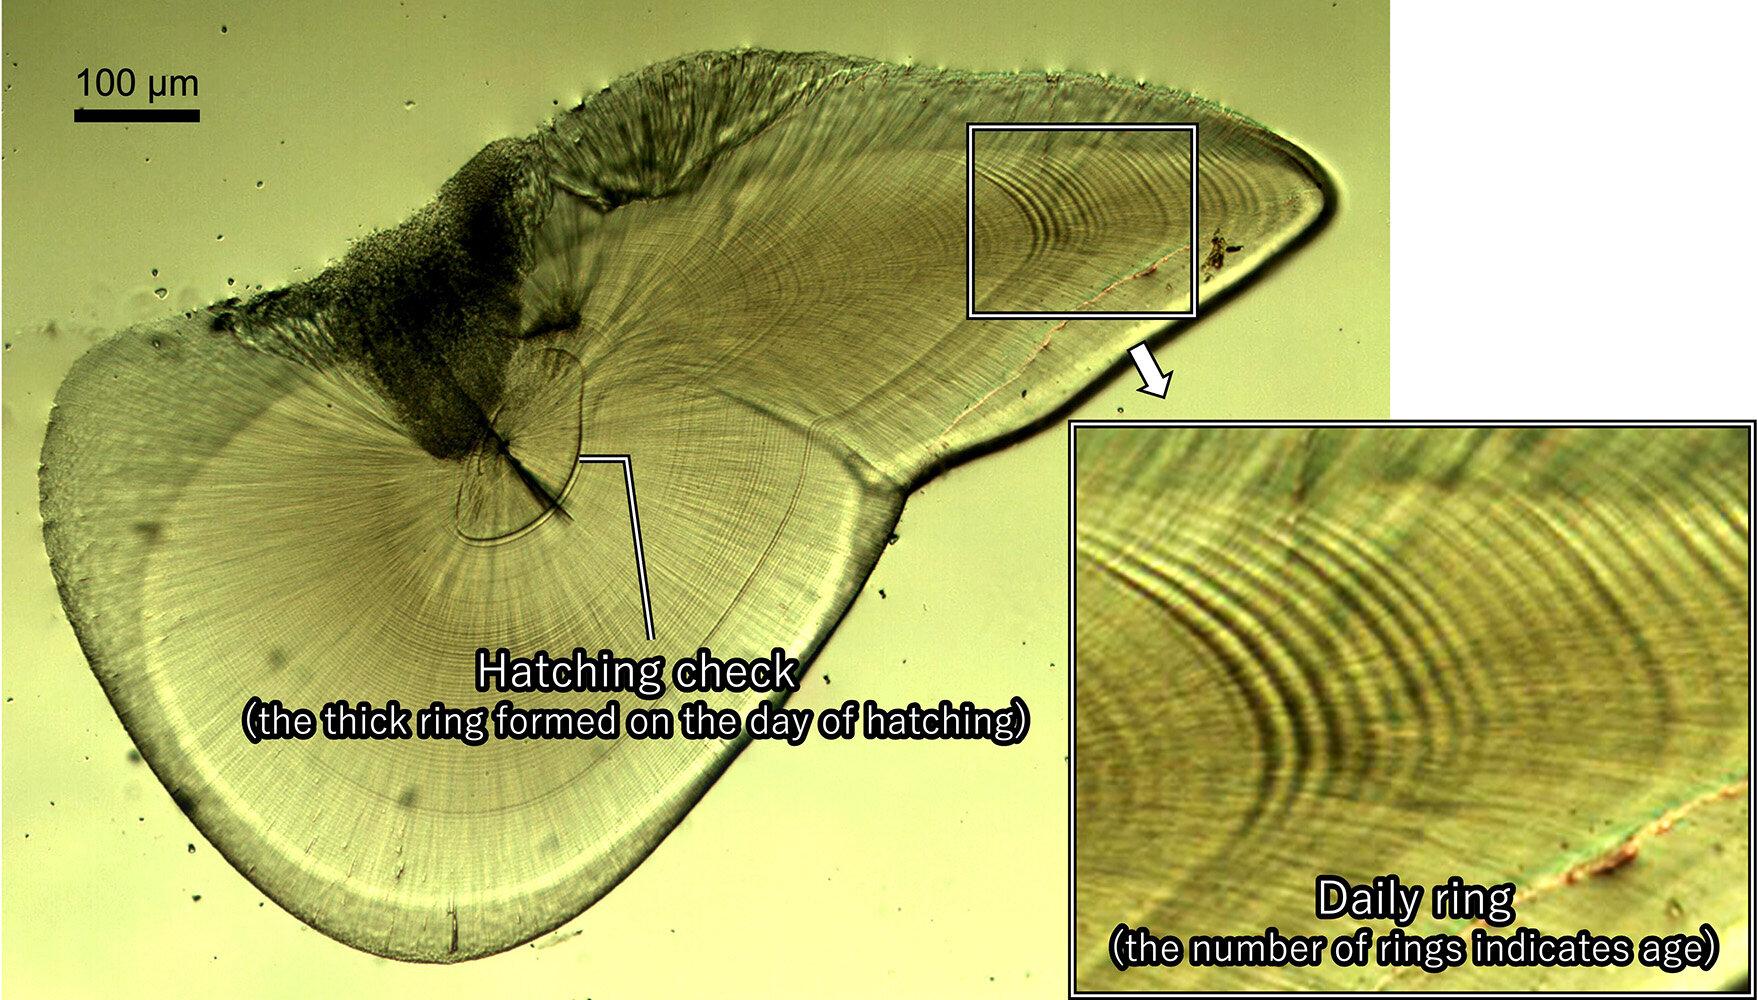 A green slide showing the statolith structure. There is a ring in the middle called the hatching check and then a close up of the daily rings in the layers that represent growth.